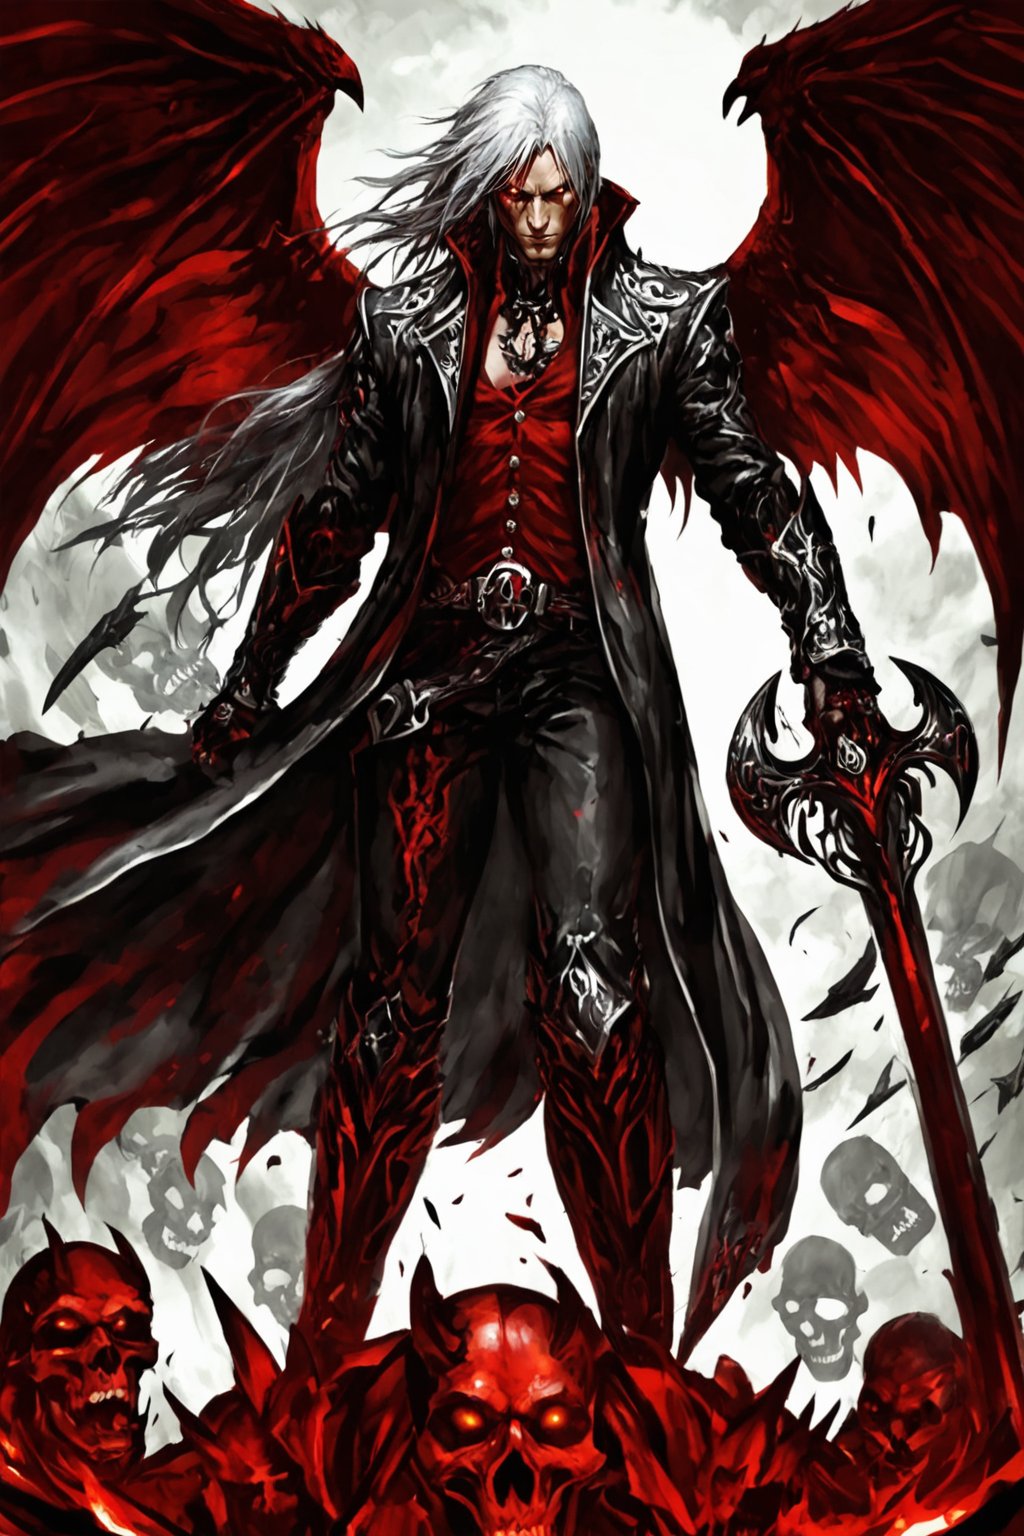 **Overview:** This image likely depicts Dante, the protagonist of the Devil May Cry series, in his iconic devil-hunting attire. As the leader of the Nephilim Order, Dante is known for his bravery and skill in battling demonic forces.

**Main Subject(s):** Dante himself, with a focus on his striking white hair, piercing red eyes, and fierce expression, as well as his trusty sword, Rebellion, held by his right hand. The image also features the massive Yamato sword slung over his back, a symbol of his power and determination. Additionally, Dante is depicted standing on top of a pile of skulls, emphasizing his connection to the underworld and his willingness to confront darkness. He wears a skull mask, which adds an air of mystery and intimidation to his character.

**Composition:** The composition likely focuses on Dante's figure, with the surrounding environment serving as a backdrop to highlight his character. The use of bold colors and dramatic lighting may add emphasis to Dante's intense gaze and powerful stance. The positioning of Yamato across his back creates a sense of depth and dimensionality in the image. The pile of skulls below Dante adds a sense of darkness and foreboding, underscoring the theme of battling demonic forces.

**Emotional Impact/Mood:** This image is likely to convey a sense of determination, courage, and intensity, reflecting Dante's unyielding spirit in the face of demonic threats. The presence of Yamato slung over his back may also suggest a sense of readiness for battle, as if Dante is prepared to take on any foe that comes his way. The image also hints at Dante's connection to the underworld and his willingness to confront darkness head-on.

**Technical Information (Assumptions):** Assuming this is a digital artwork or concept art, the artist may have used Adobe Photoshop or similar software to create the image. The color palette might include bold whites, fiery reds, dark grays, and possibly some dark blues or purples to emphasize the darkness of the skulls and the underworld. Texture effects could be used to enhance Dante's armor, both Rebellion and Yamato swords, and the pile of skulls.
,DonM3l3m3nt4lXL,LegendDarkFantasy